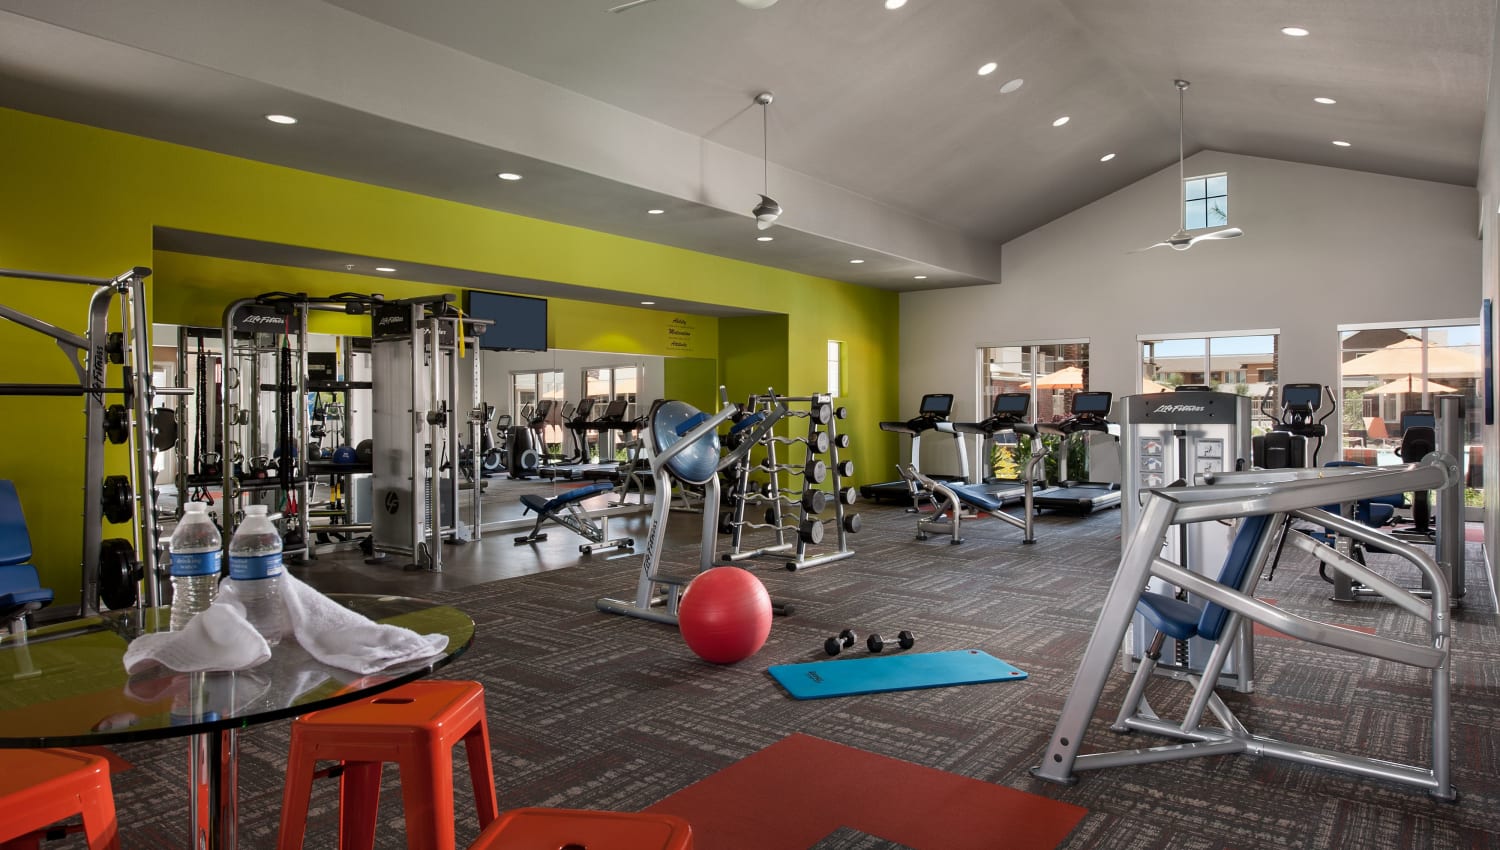 Fitness center at Highland Groves at Morrison Ranch Apartments in Gilbert, Arizona